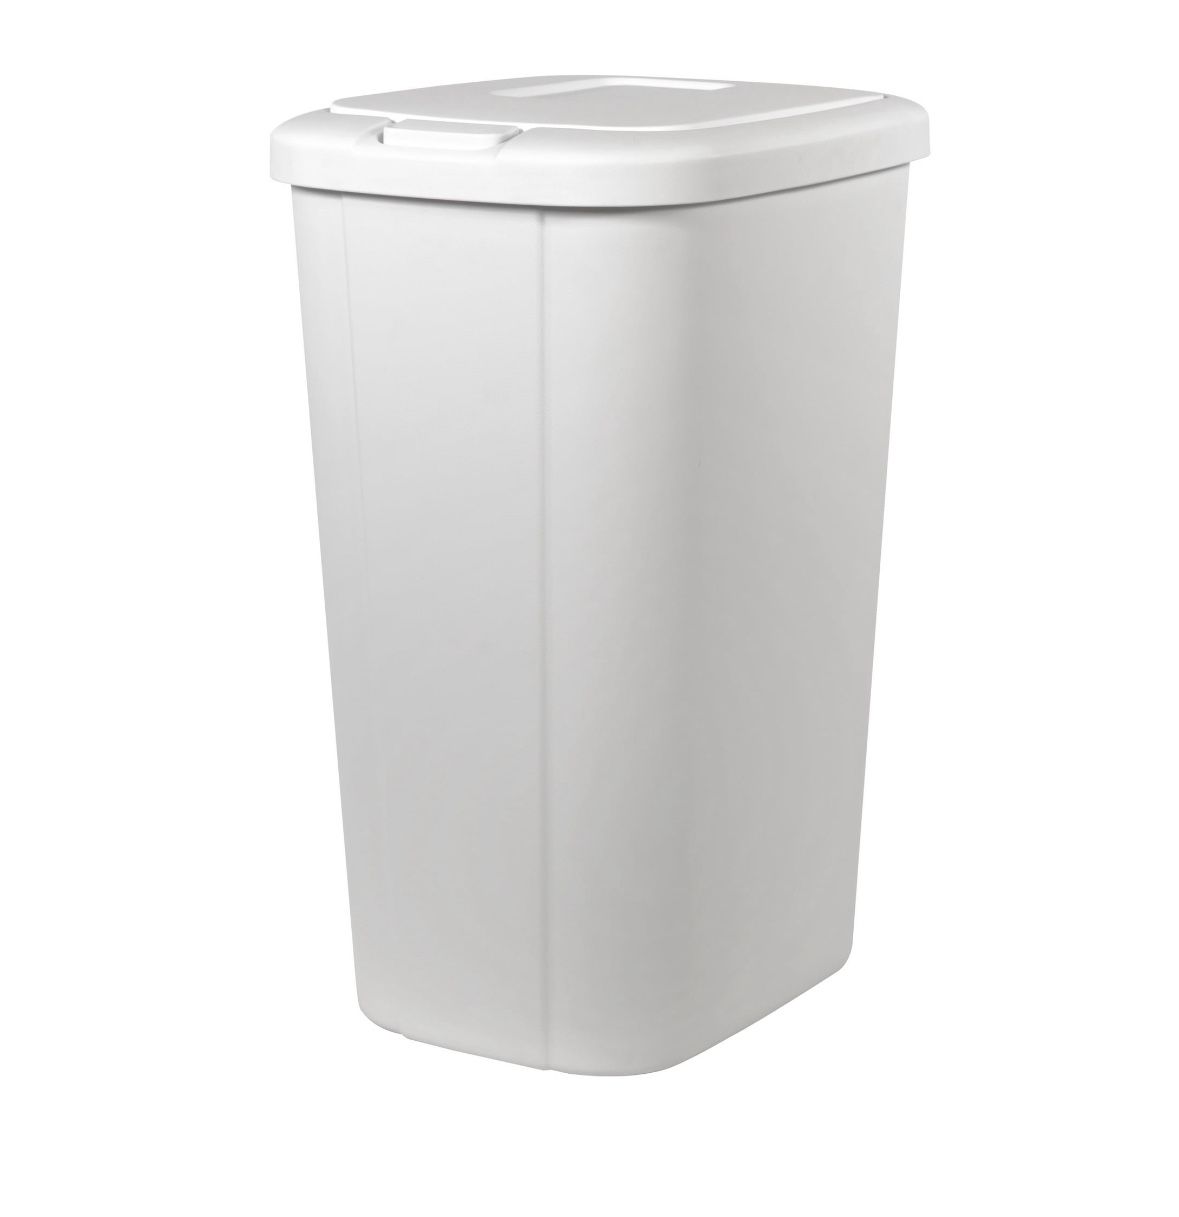 Hefty 13.3 Gallon Trash Can, Plastic Touch Top Kitchen Trash Can, White